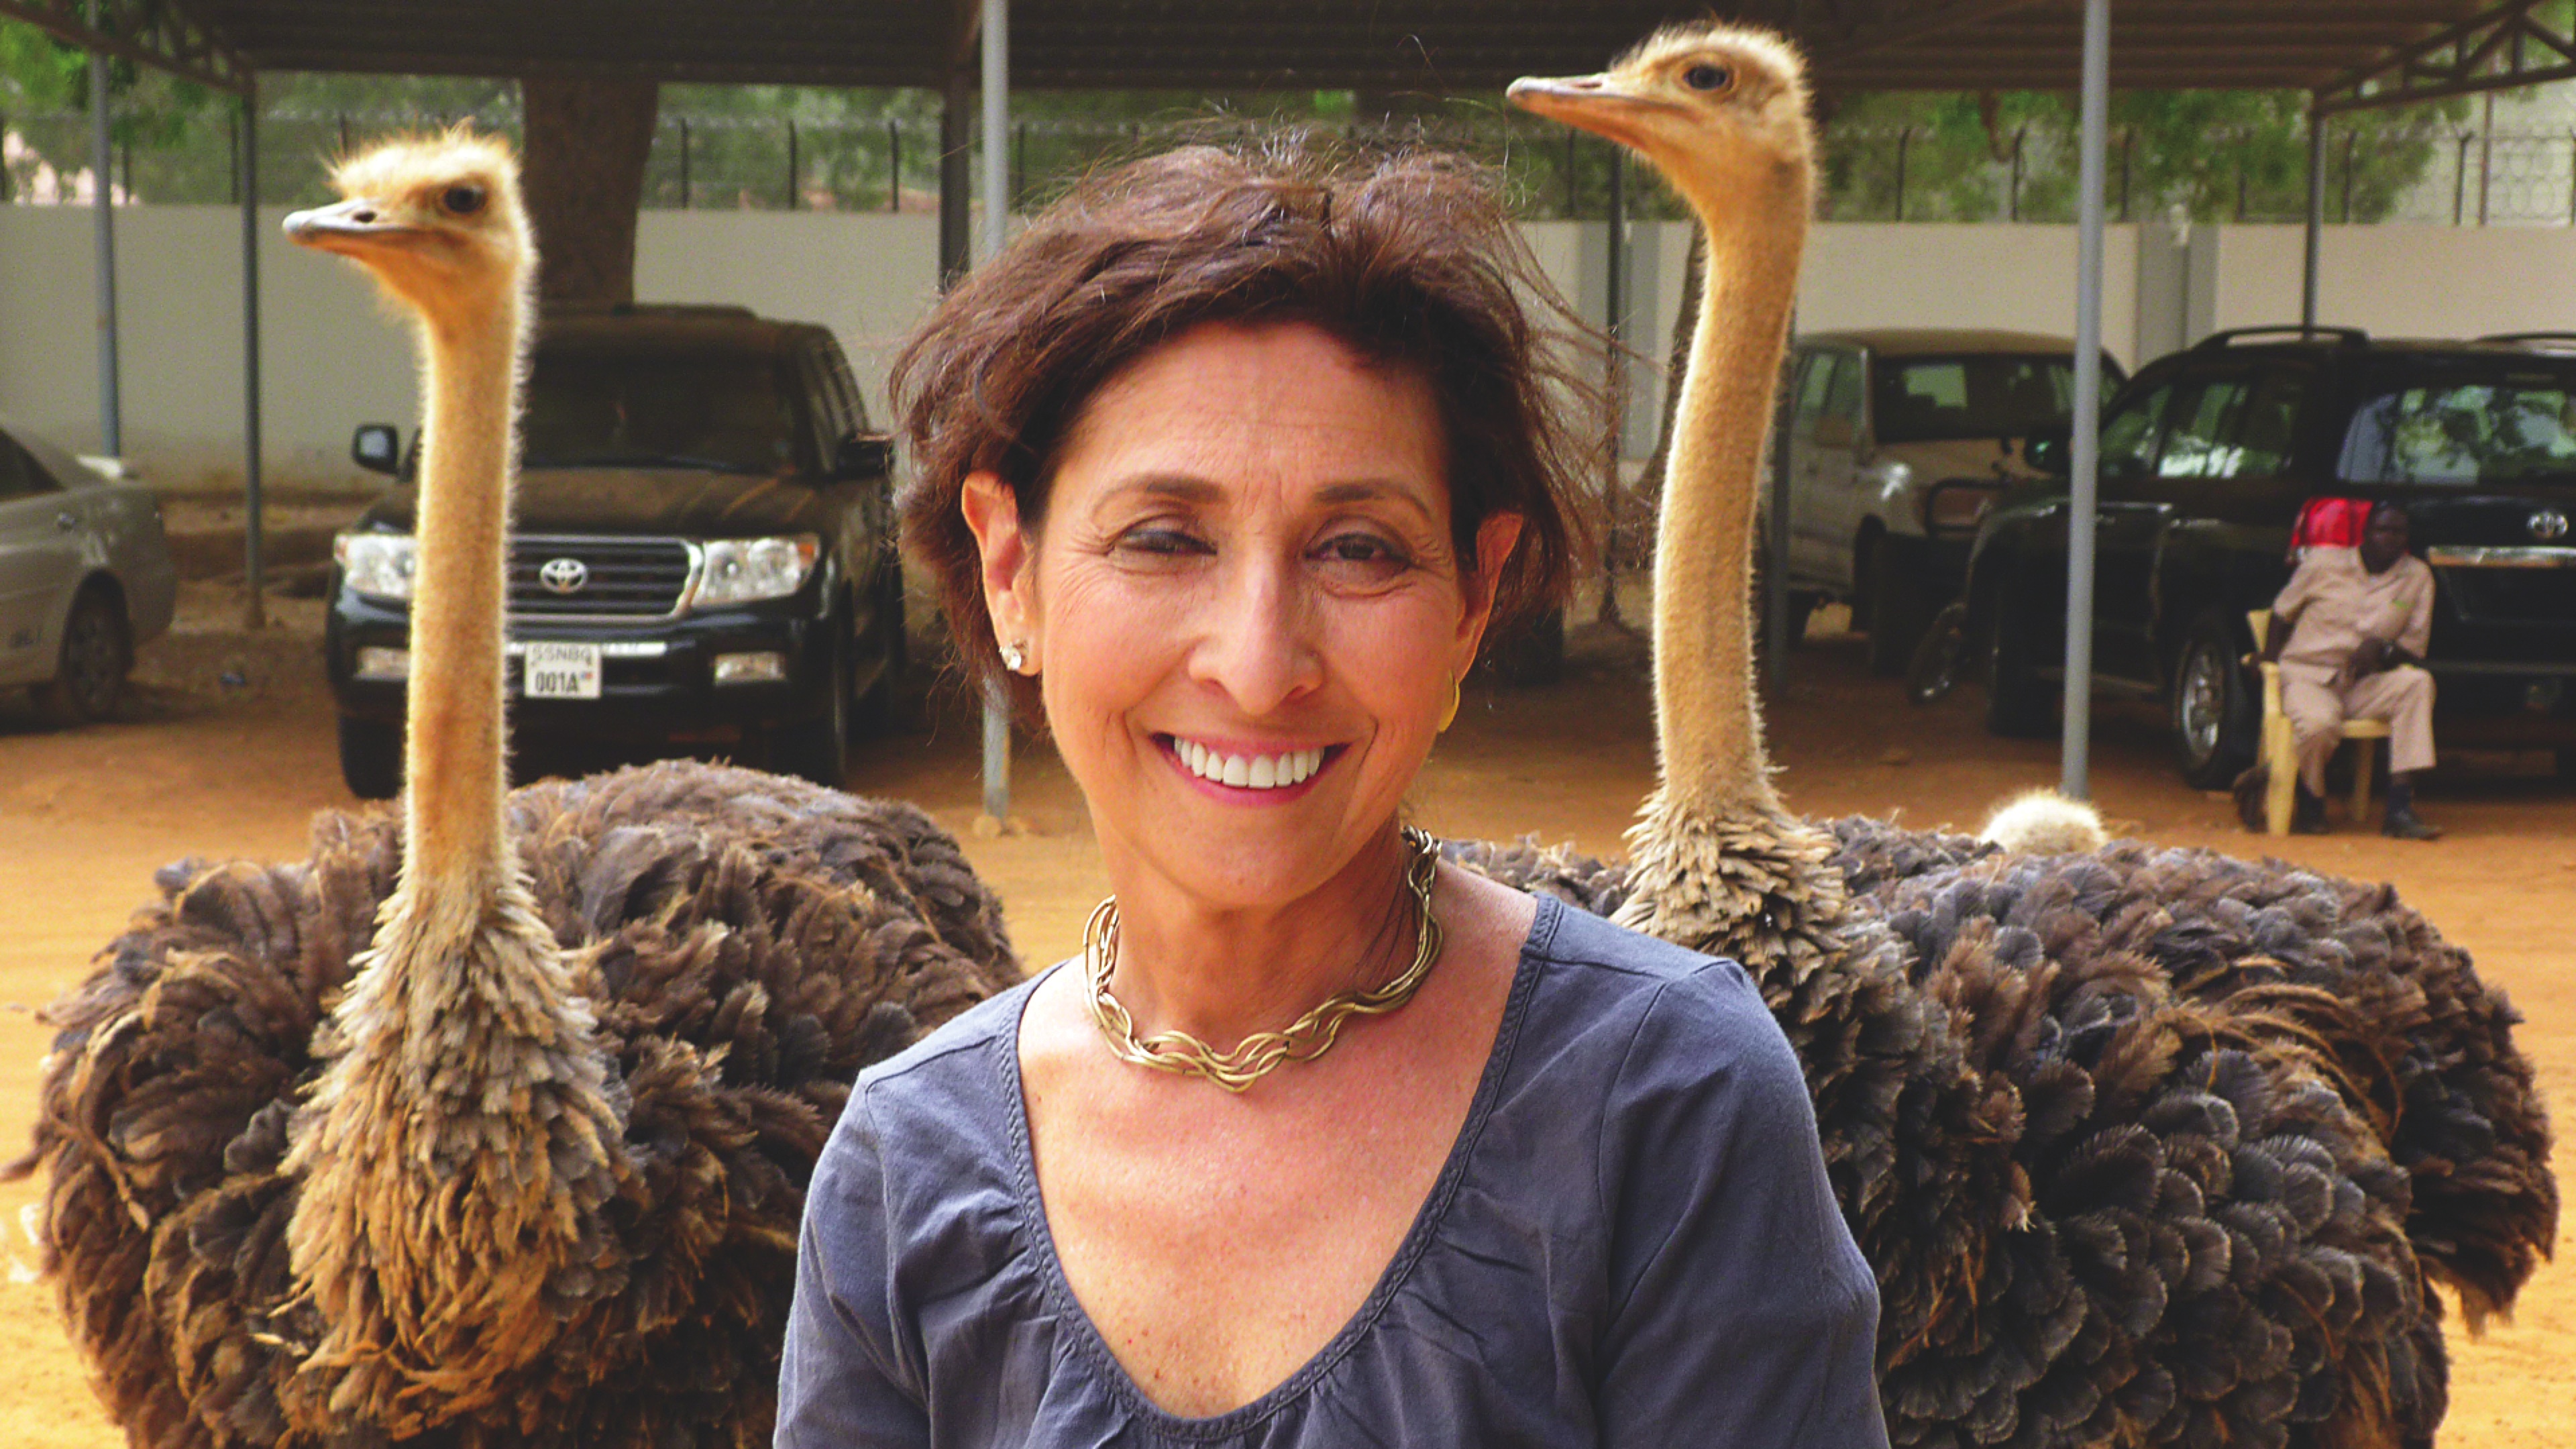 A FORCE OF NATURE + CONVERSATION WITH ELLEN RATNER